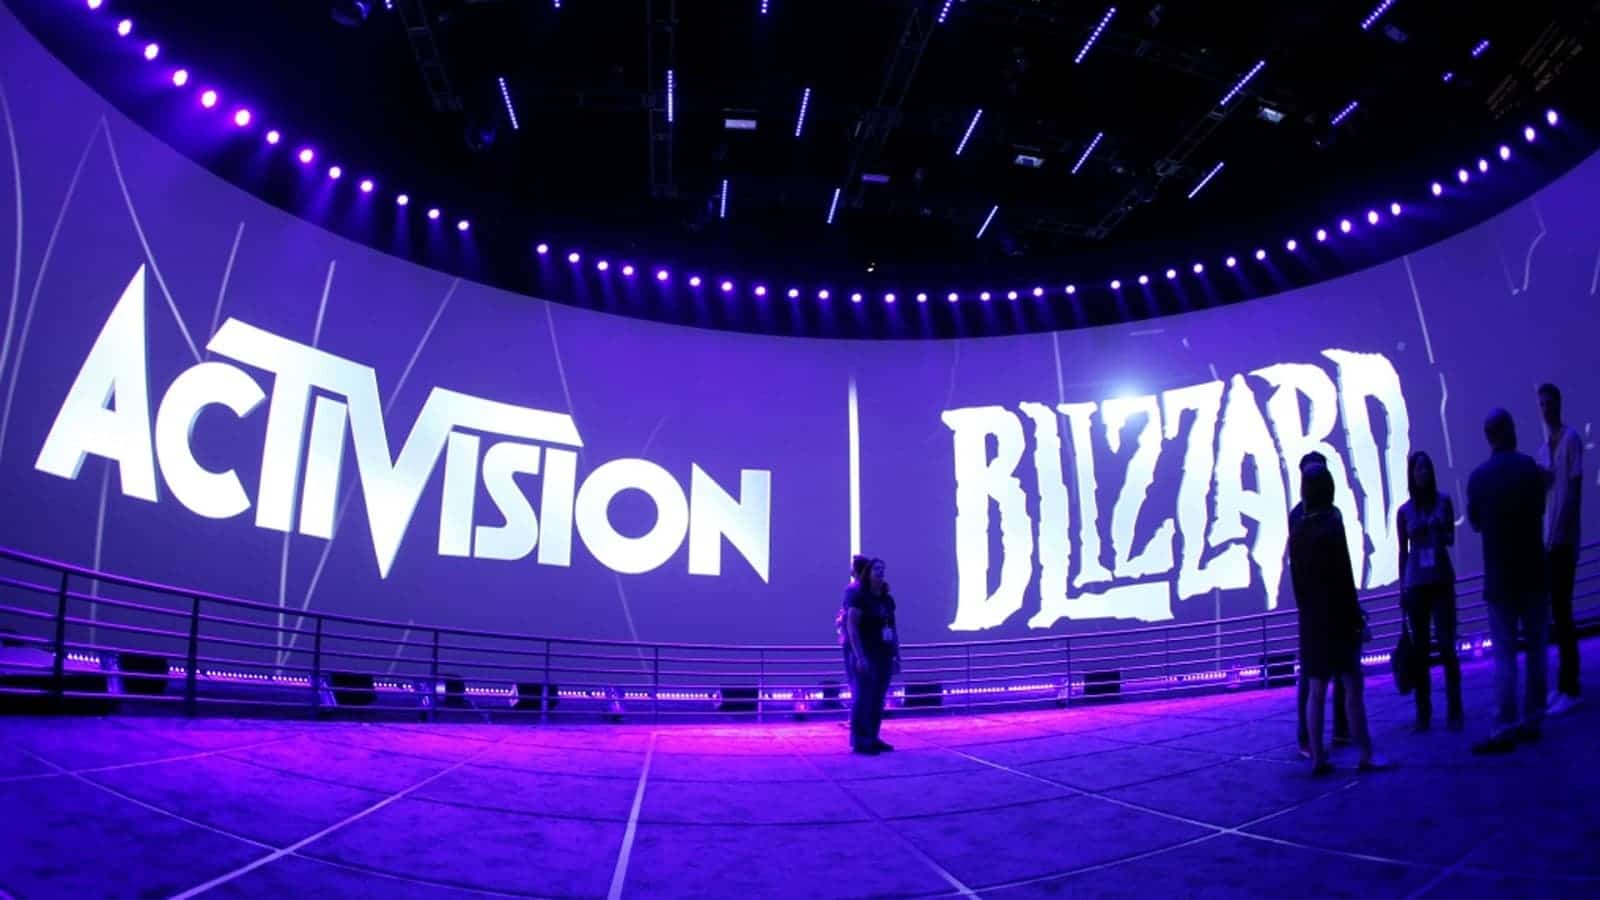 blizzard and activision logos